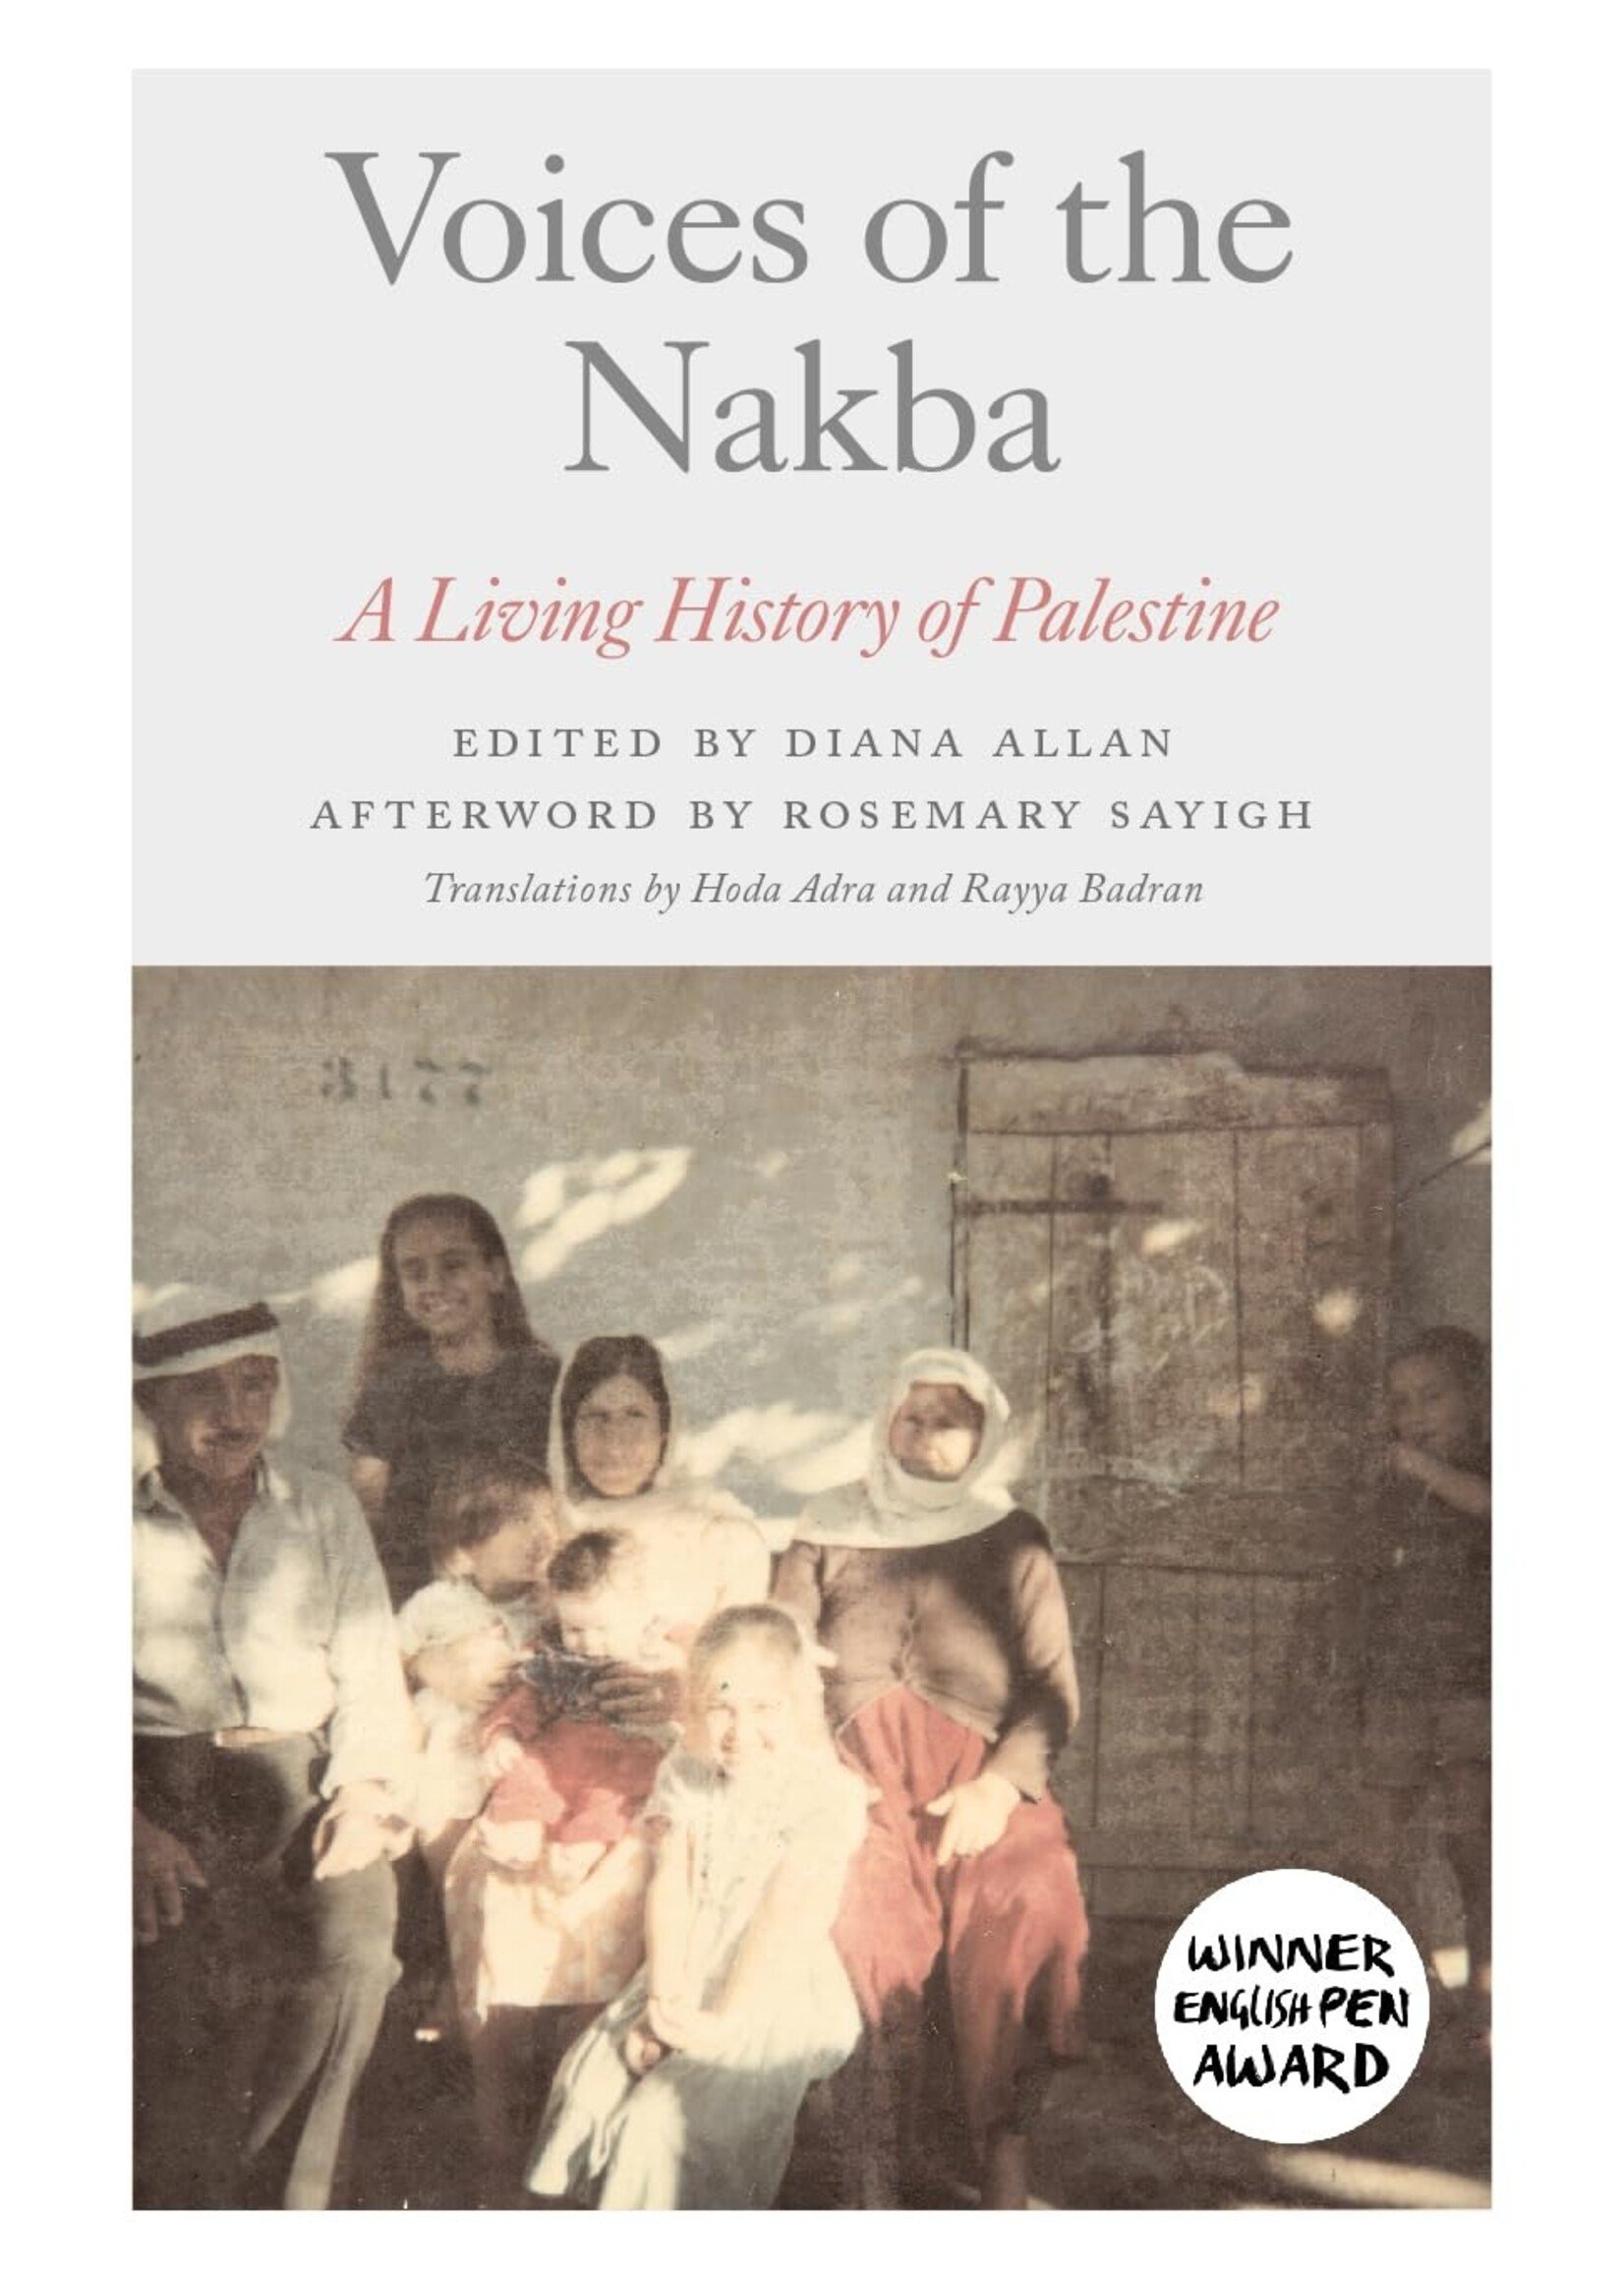 Voices of the Nakba: A Living History of Palestine